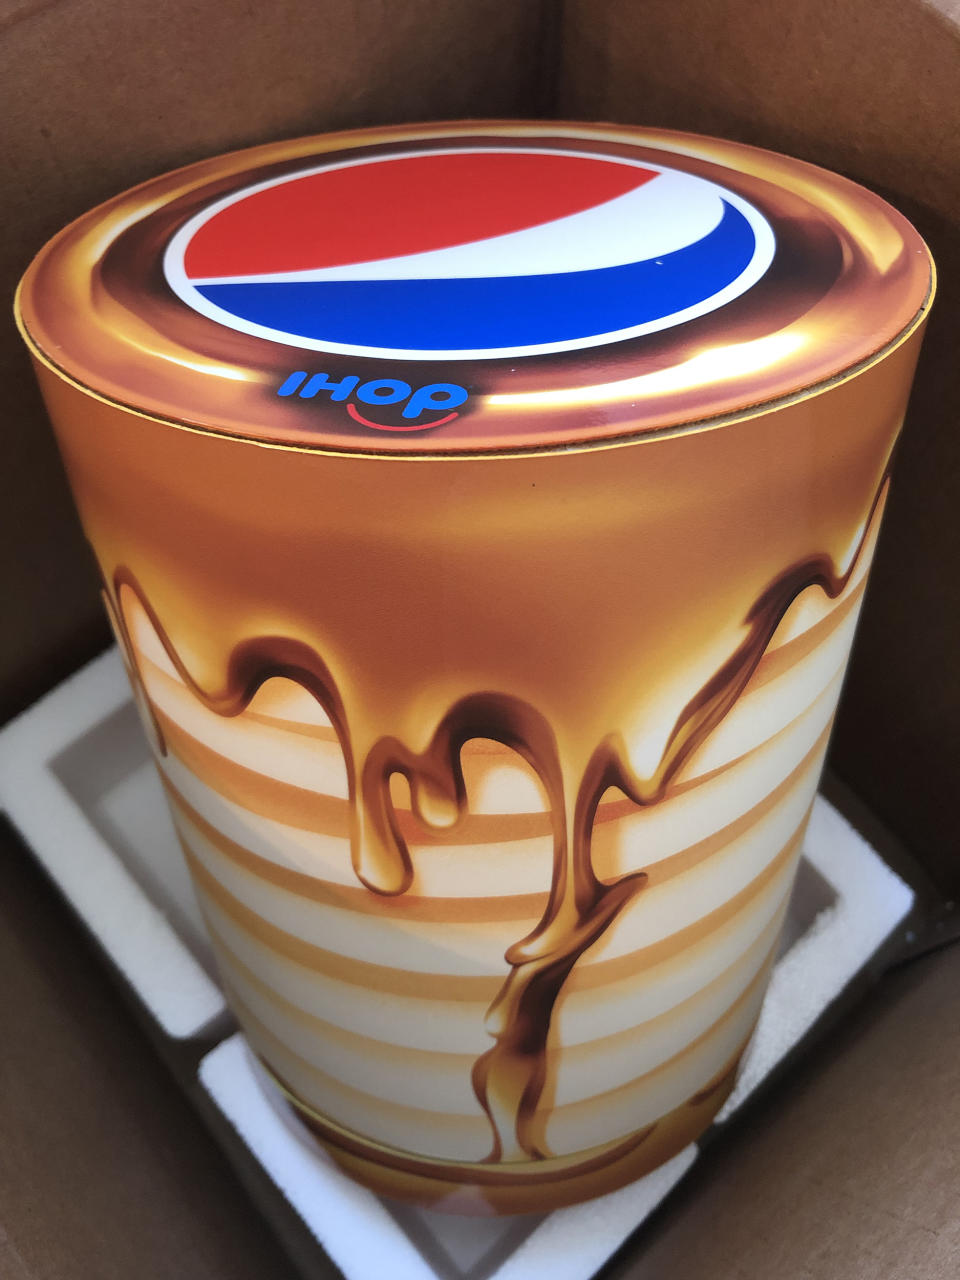 The gift box for IHOP’s Maple Syrup Pepsi goes above and beyond the call of marketing duty. (Heather Martin)